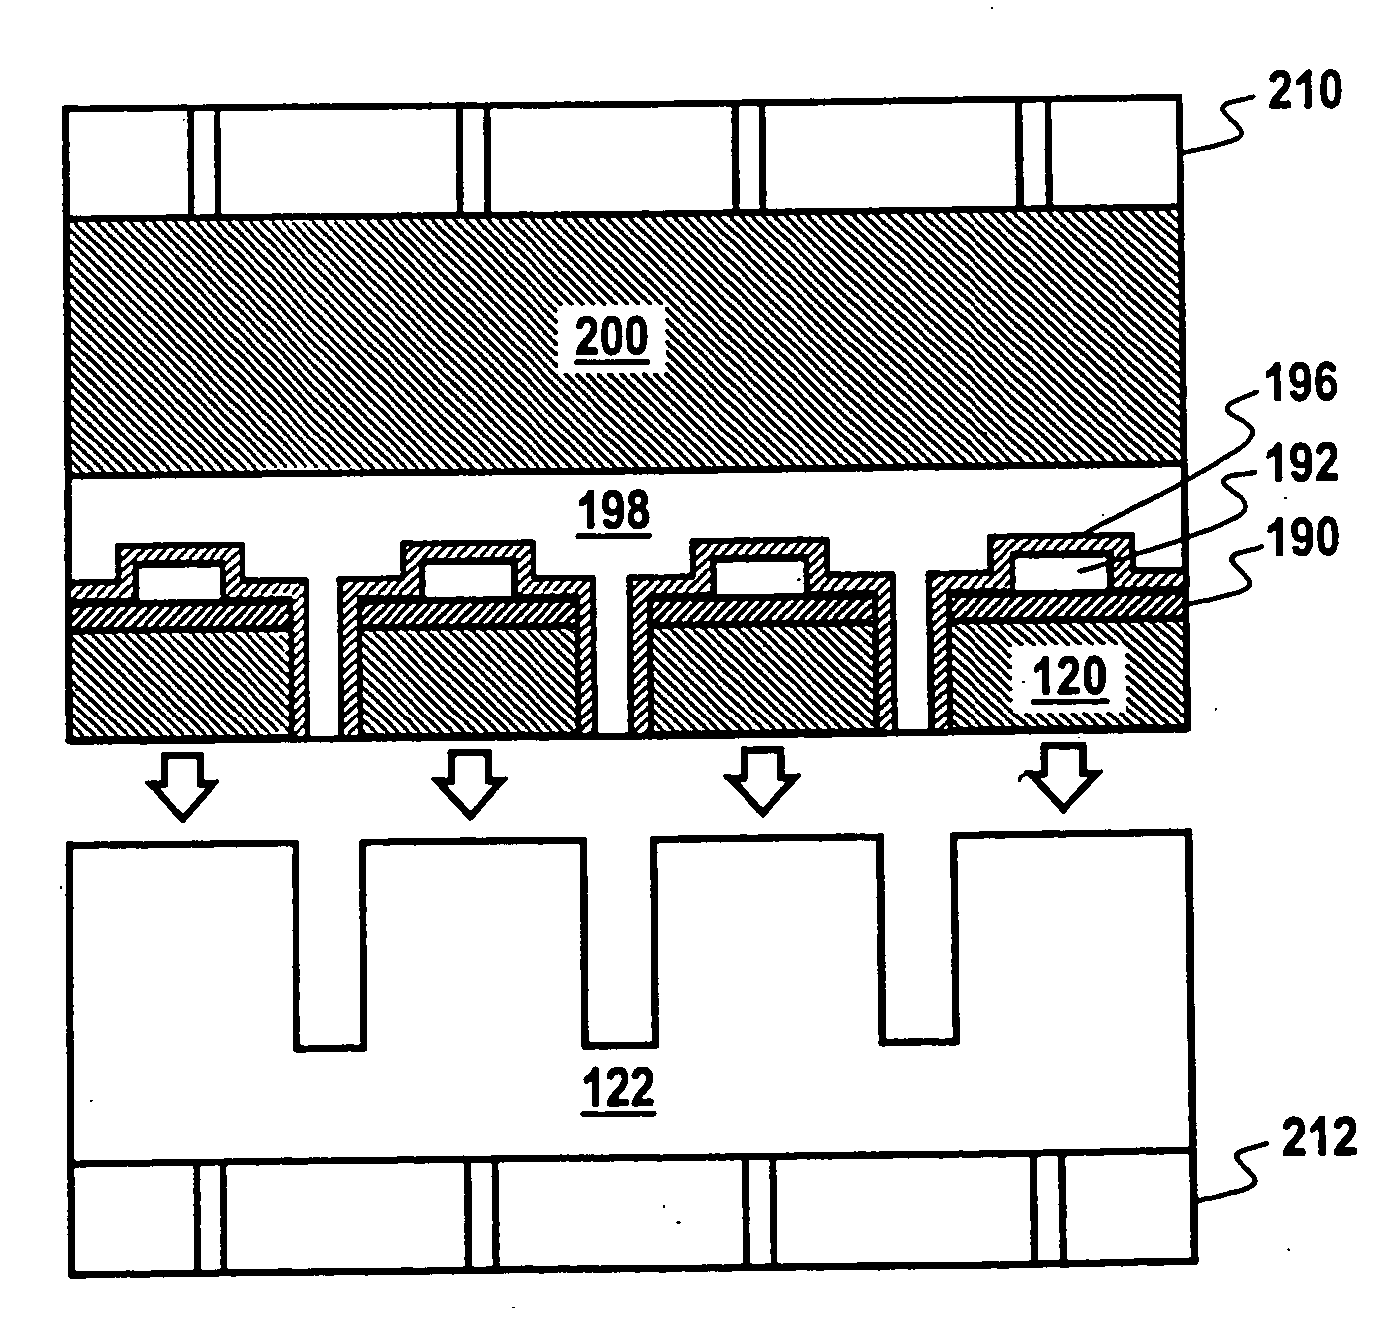 Method of fabricating vertical devices using a metal support film